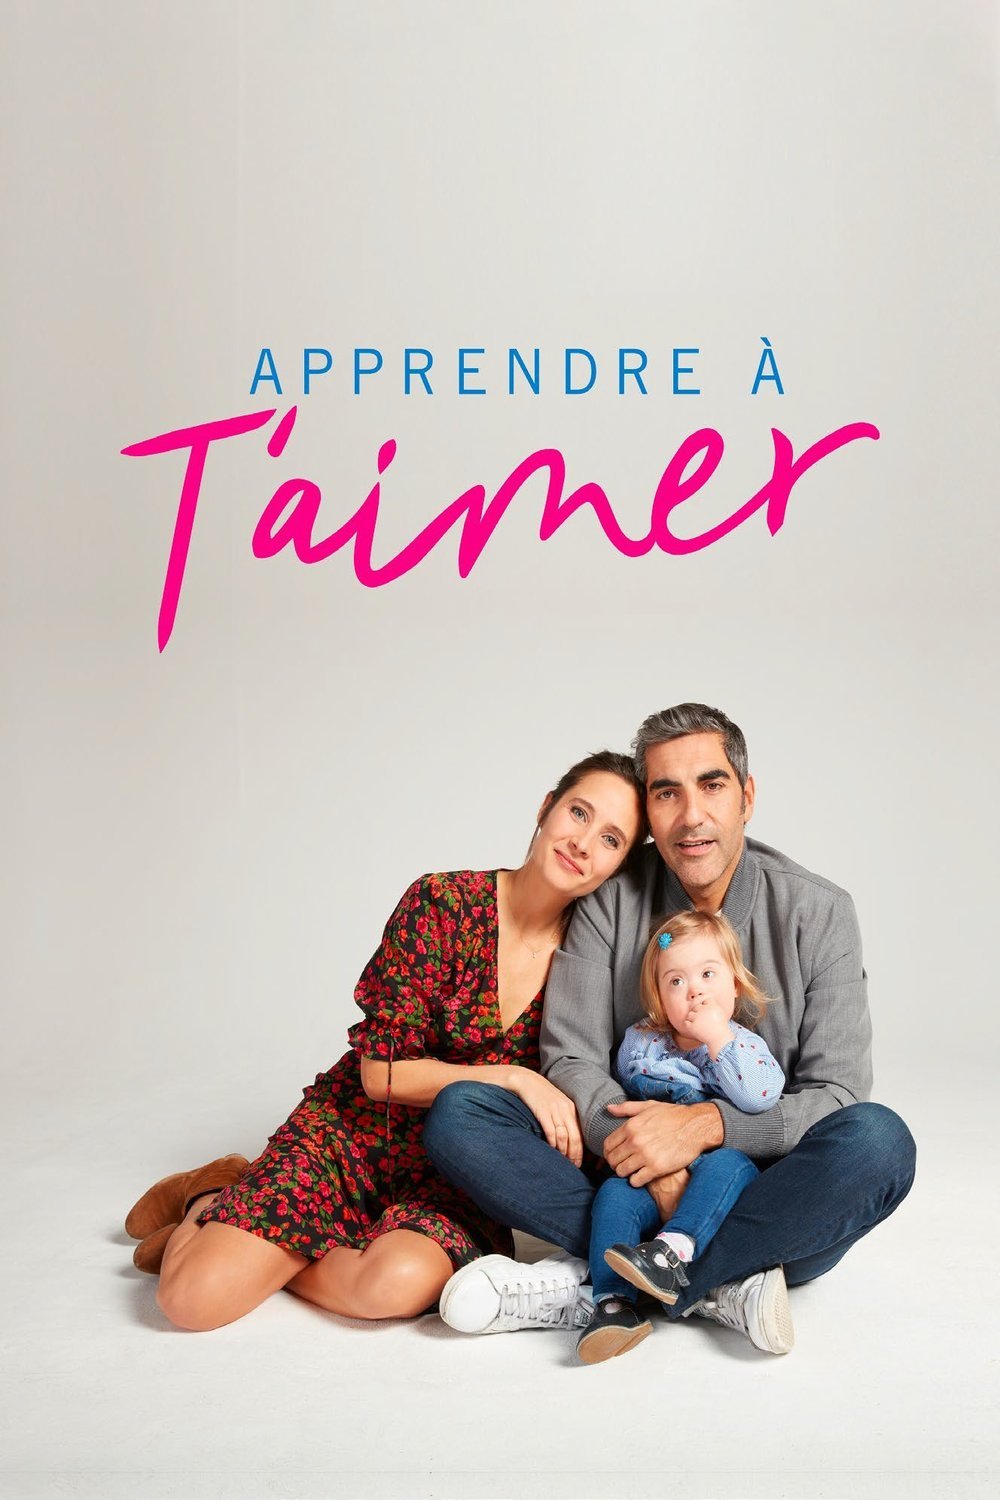 Poster of the movie Apprendre à t'aimer